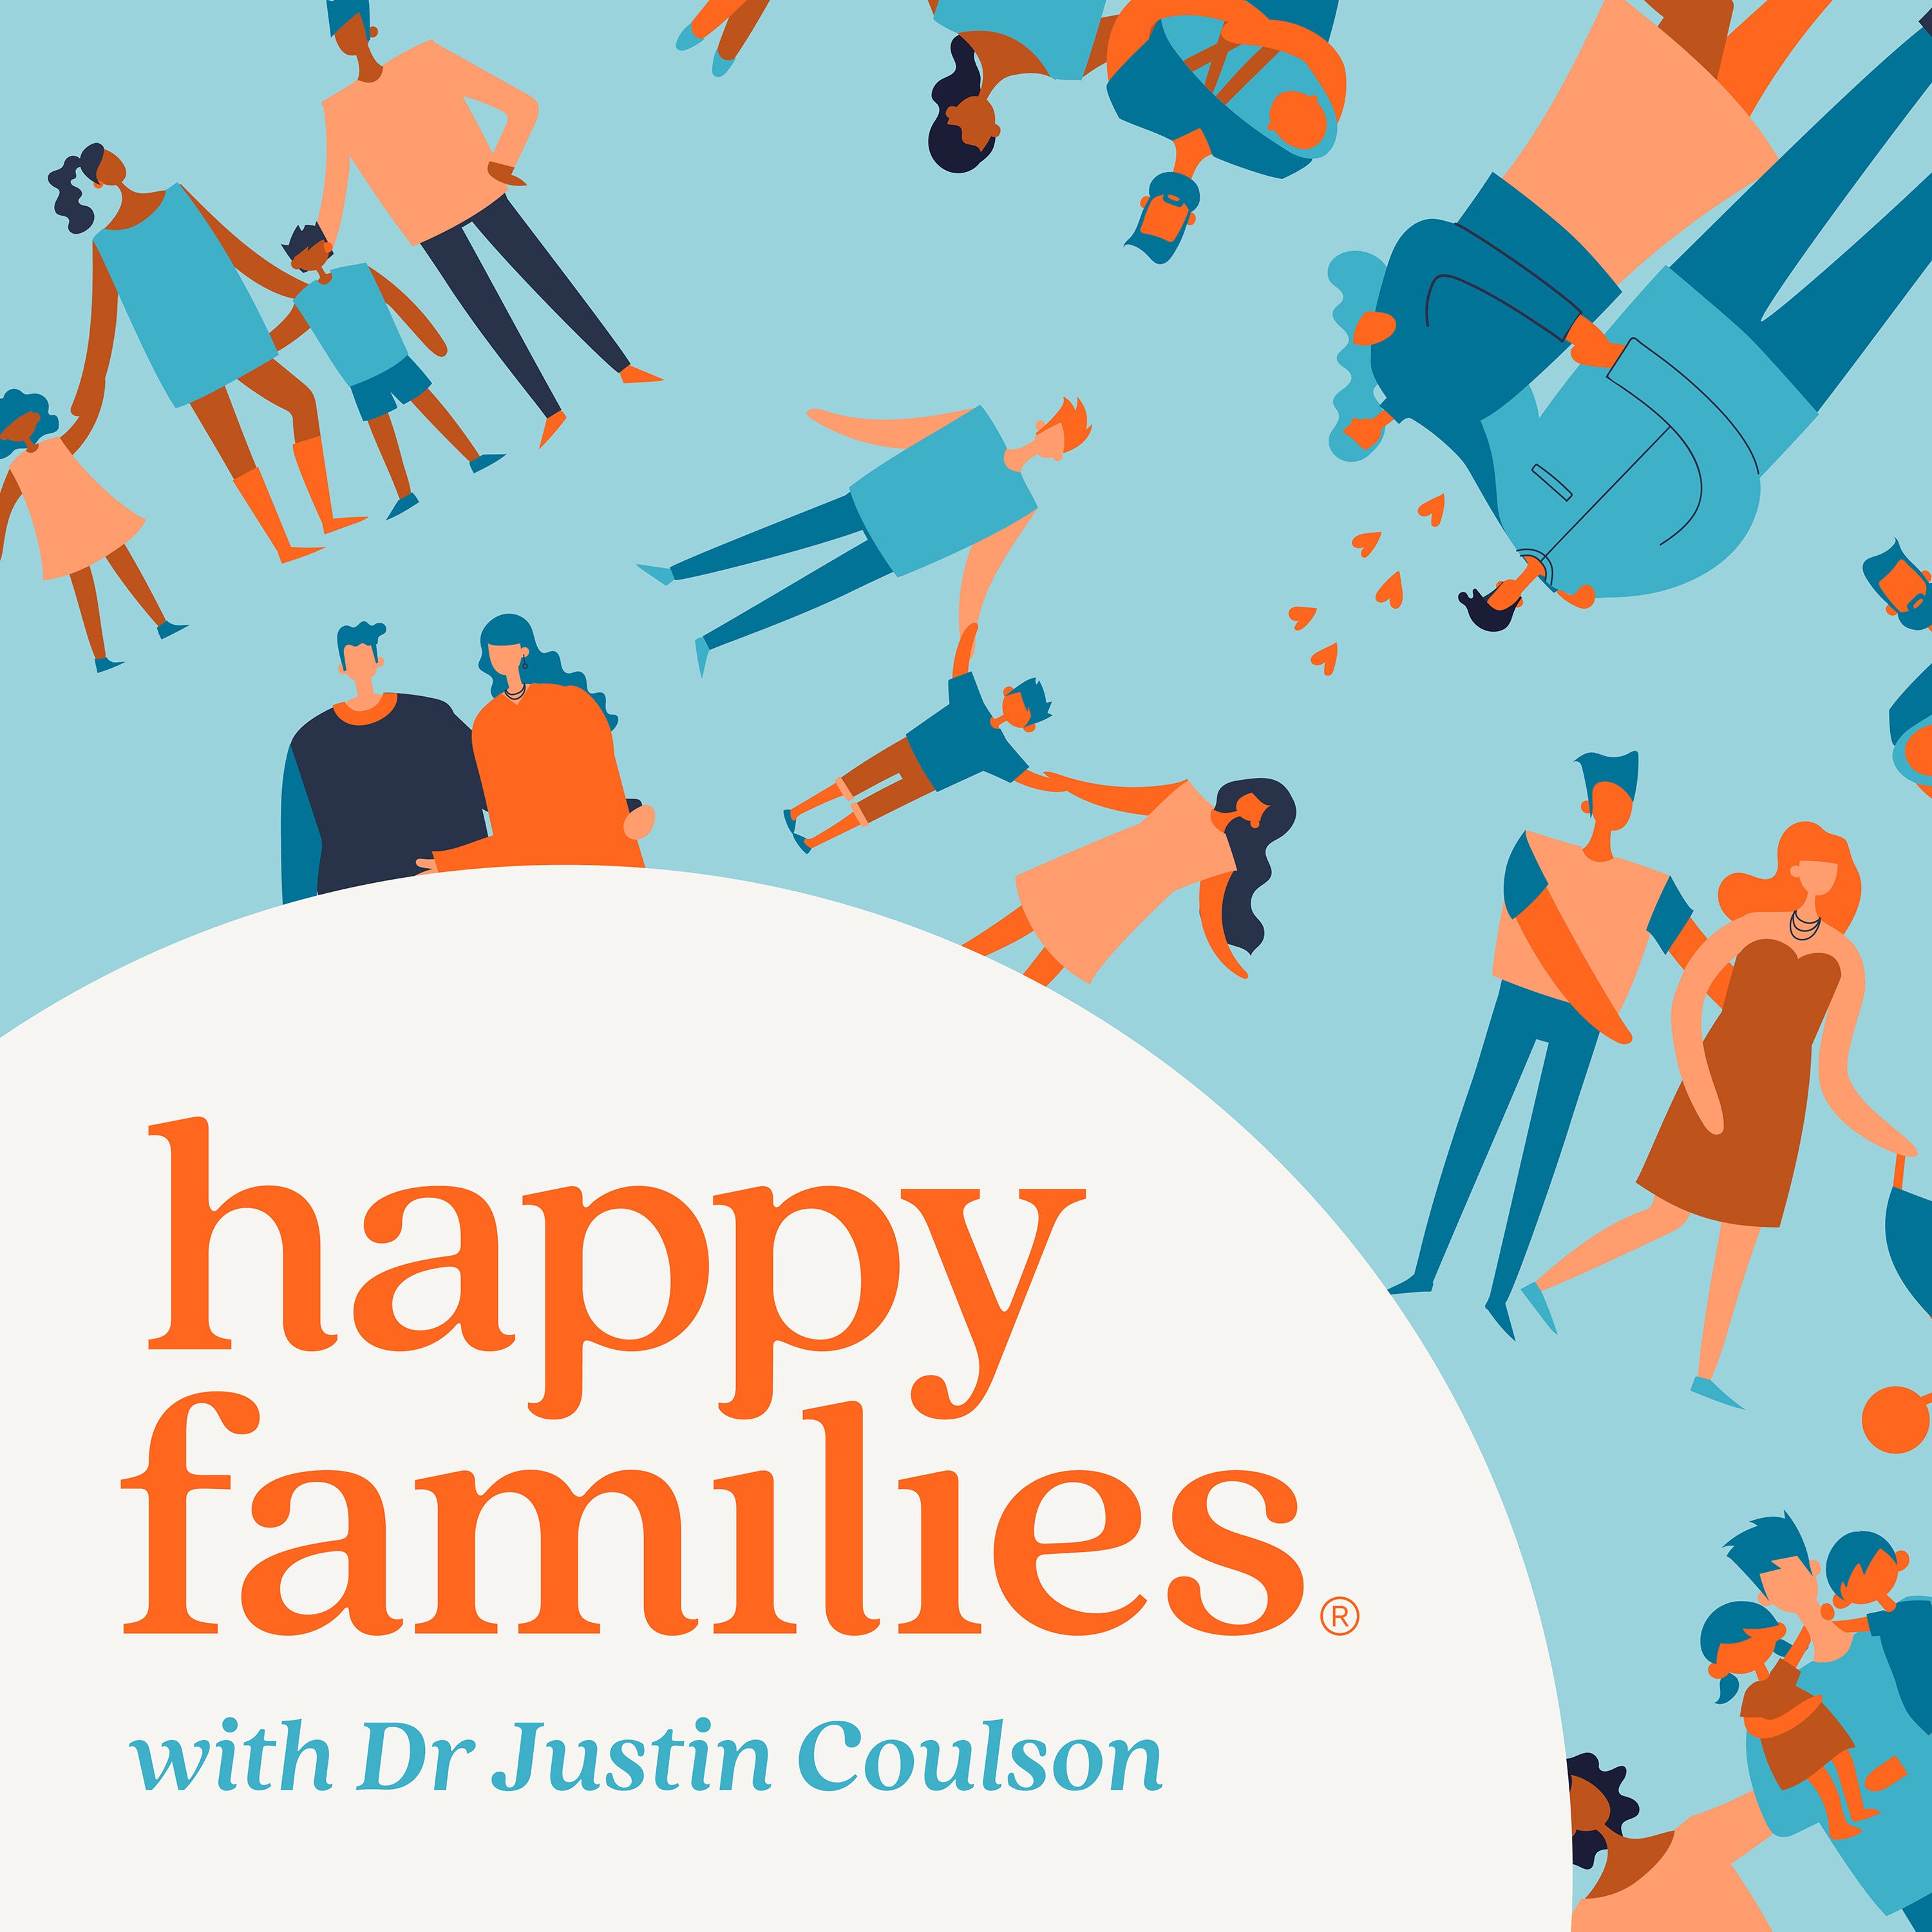 An Update From the Happy Families Team